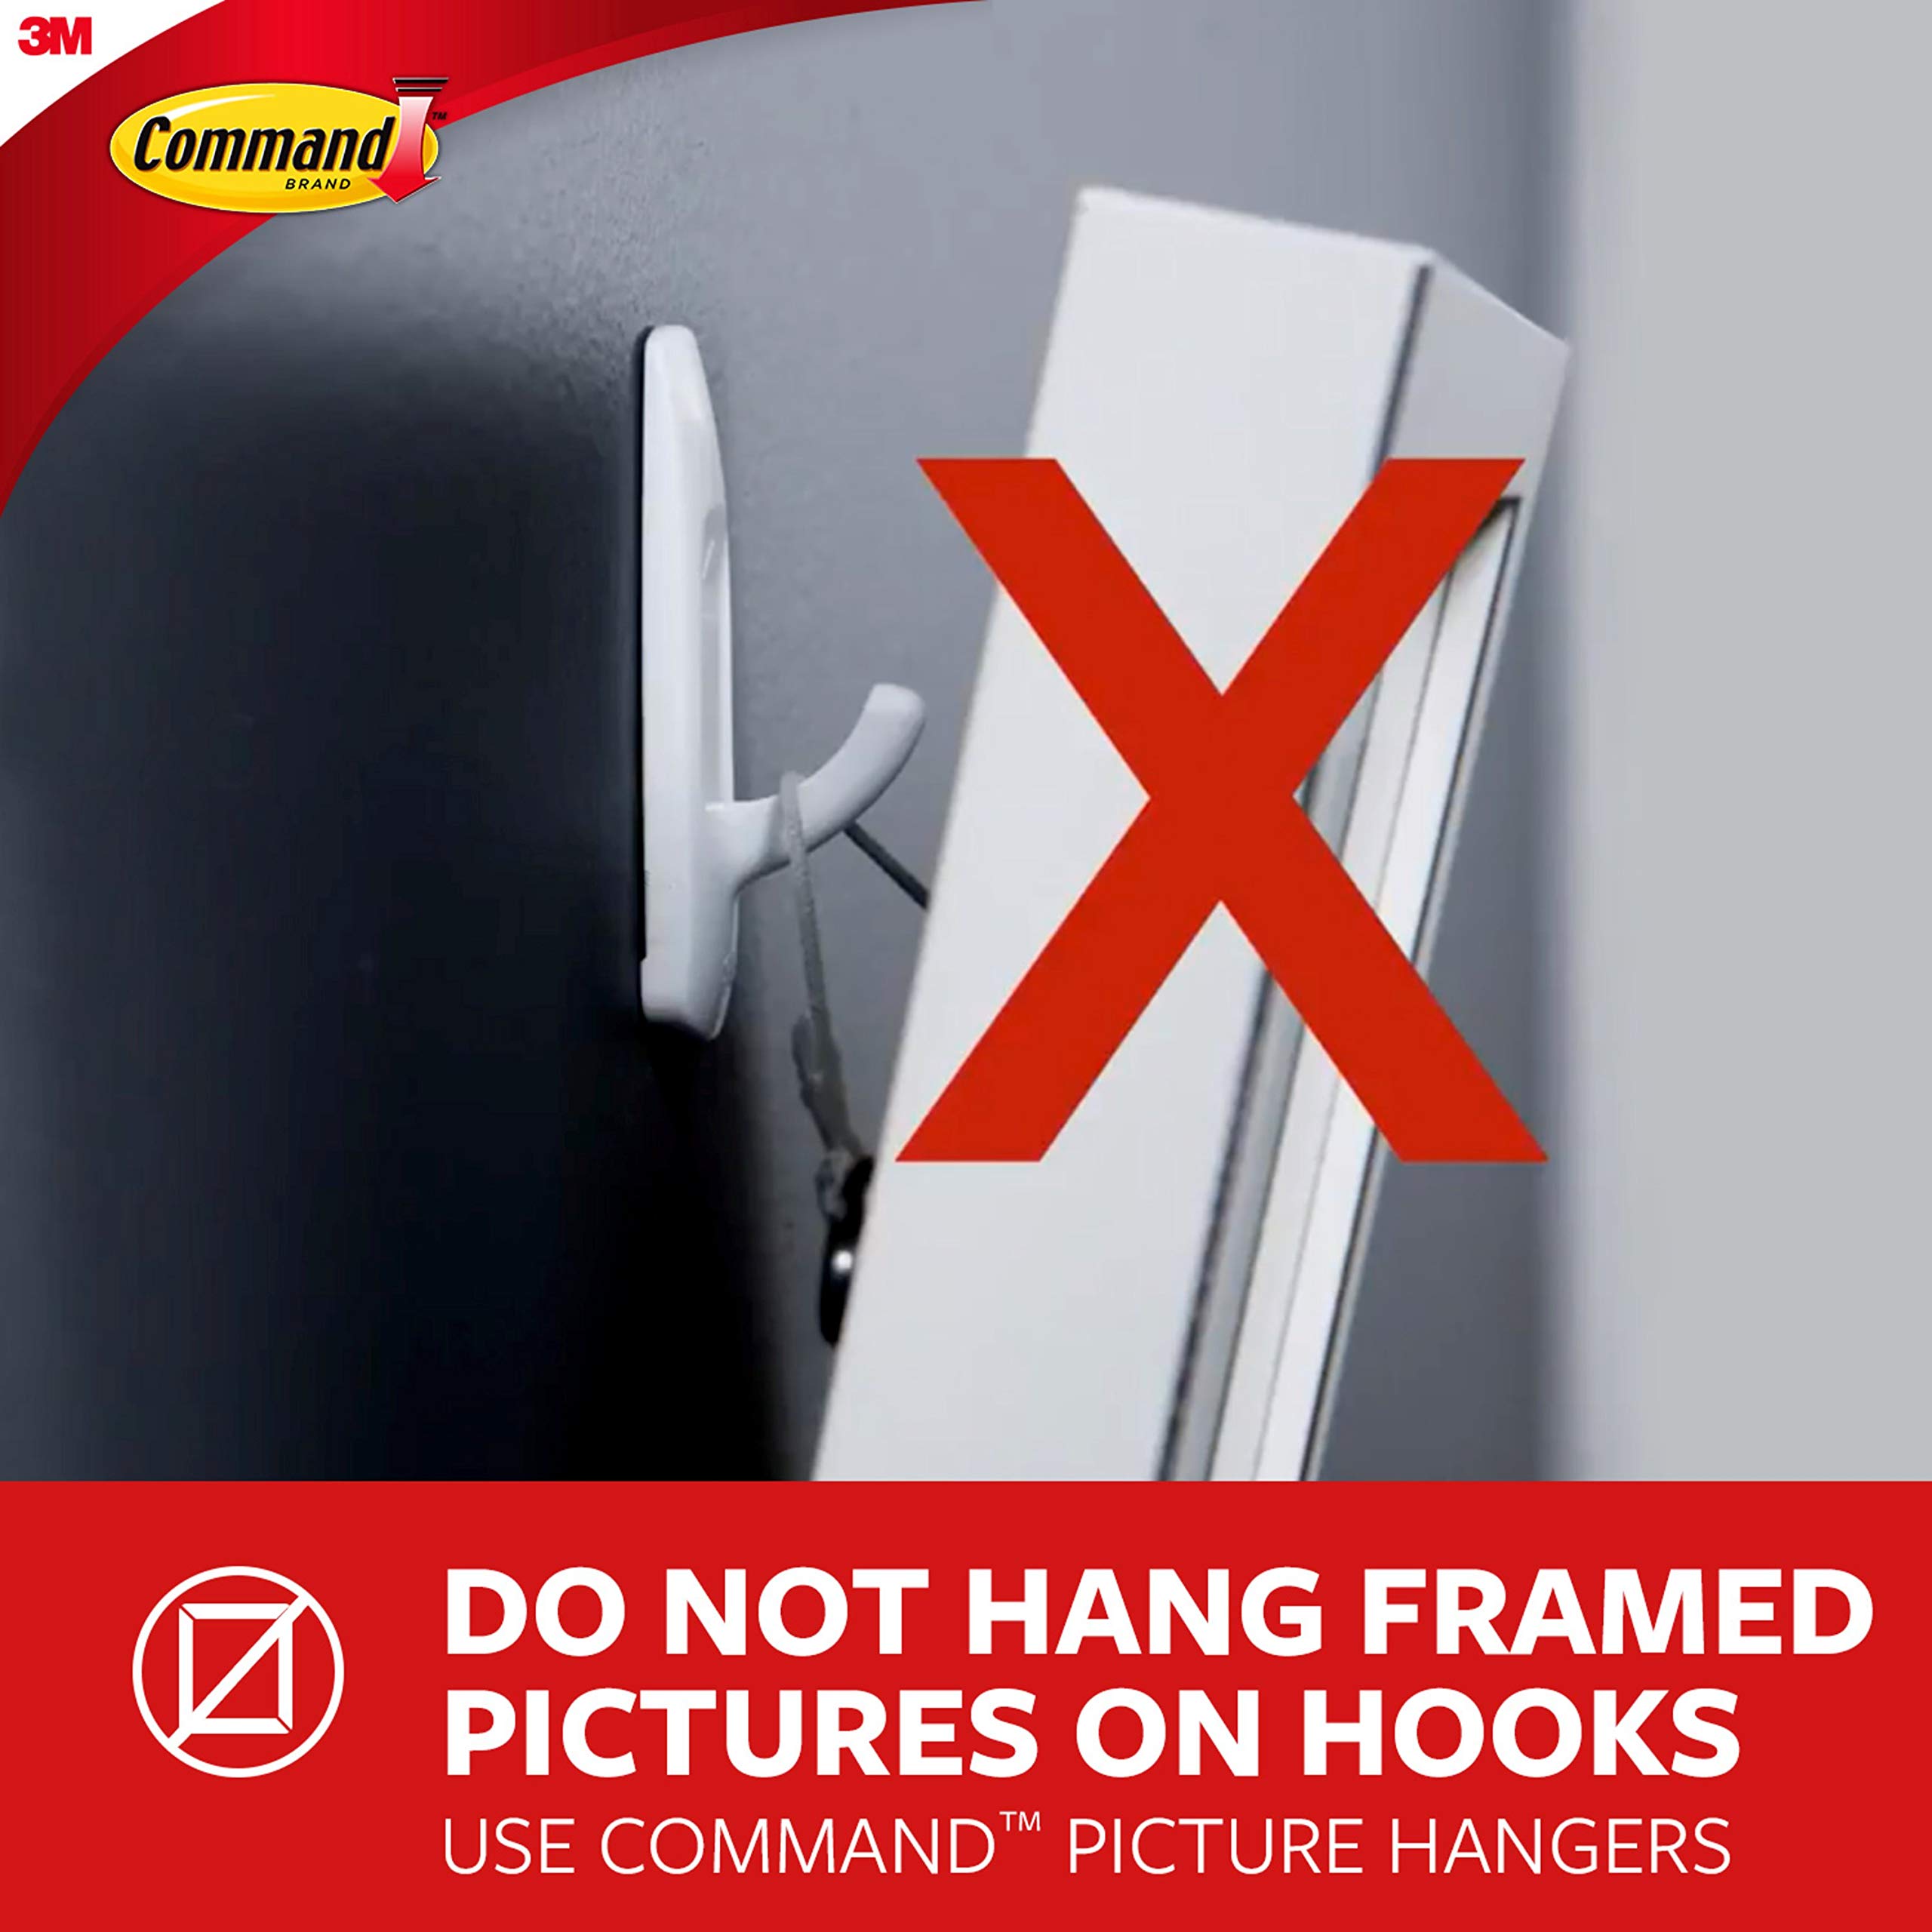 Command Sawtooth Picture Hangers, Damage Free Hanging Frame Hangers, No Tools Wall Hooks for Hanging Dorm Room Decorations in Sawtooth Frames, 4 White Picture Frame Hangers and 8 Command Strips